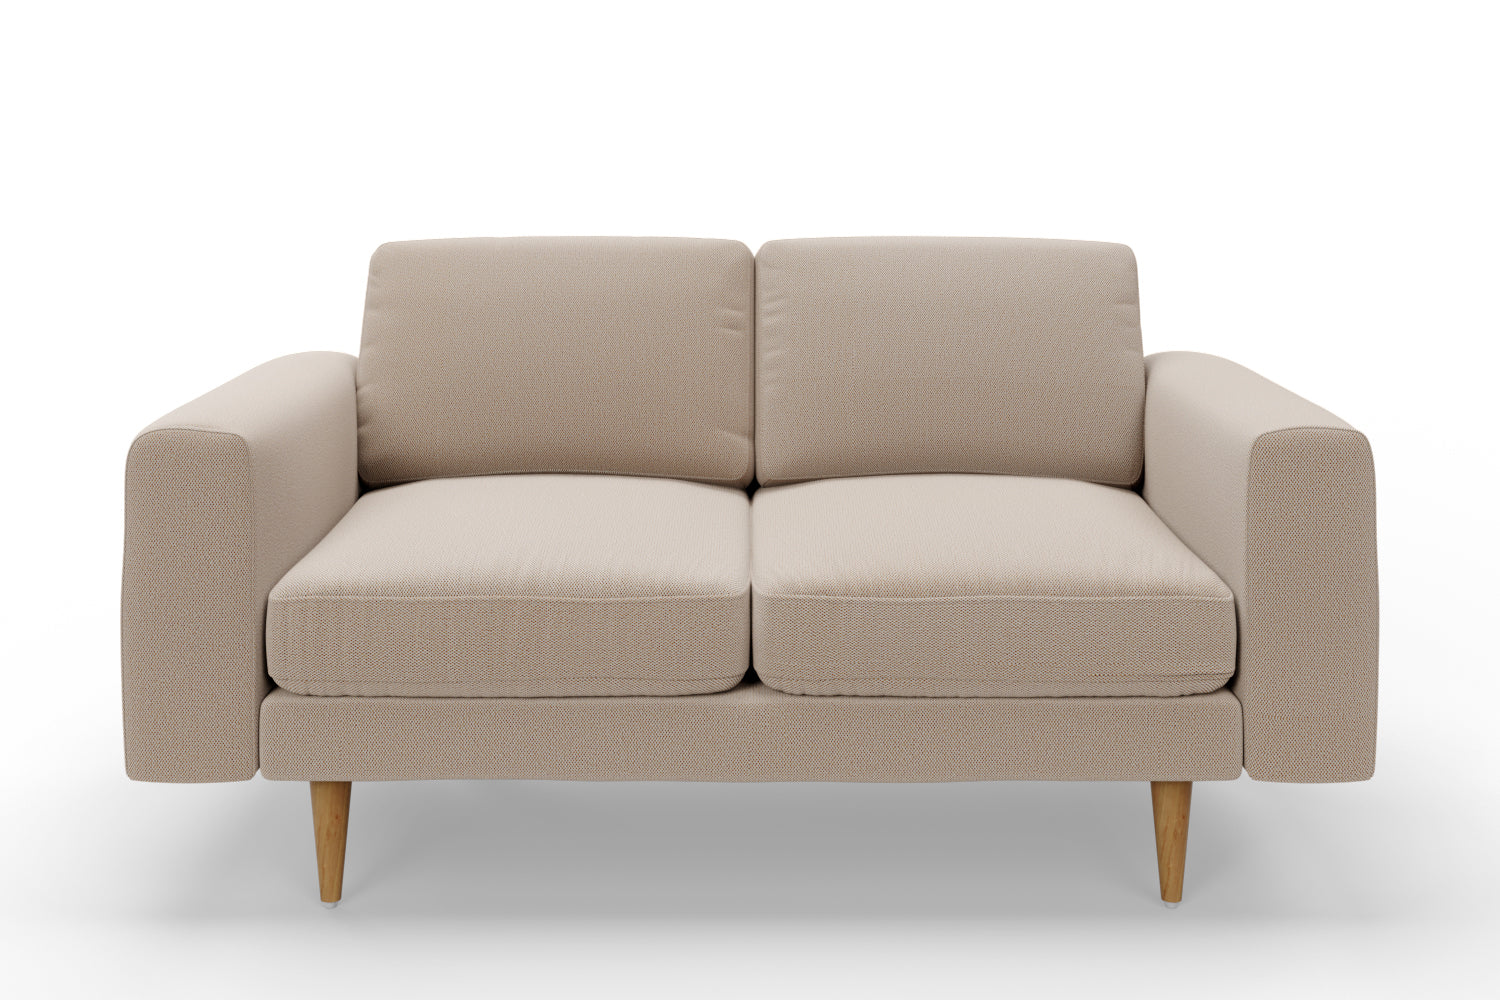 SNUG | The Big Chill 2 Seater Sofa in Oatmeal variant_40414877548592